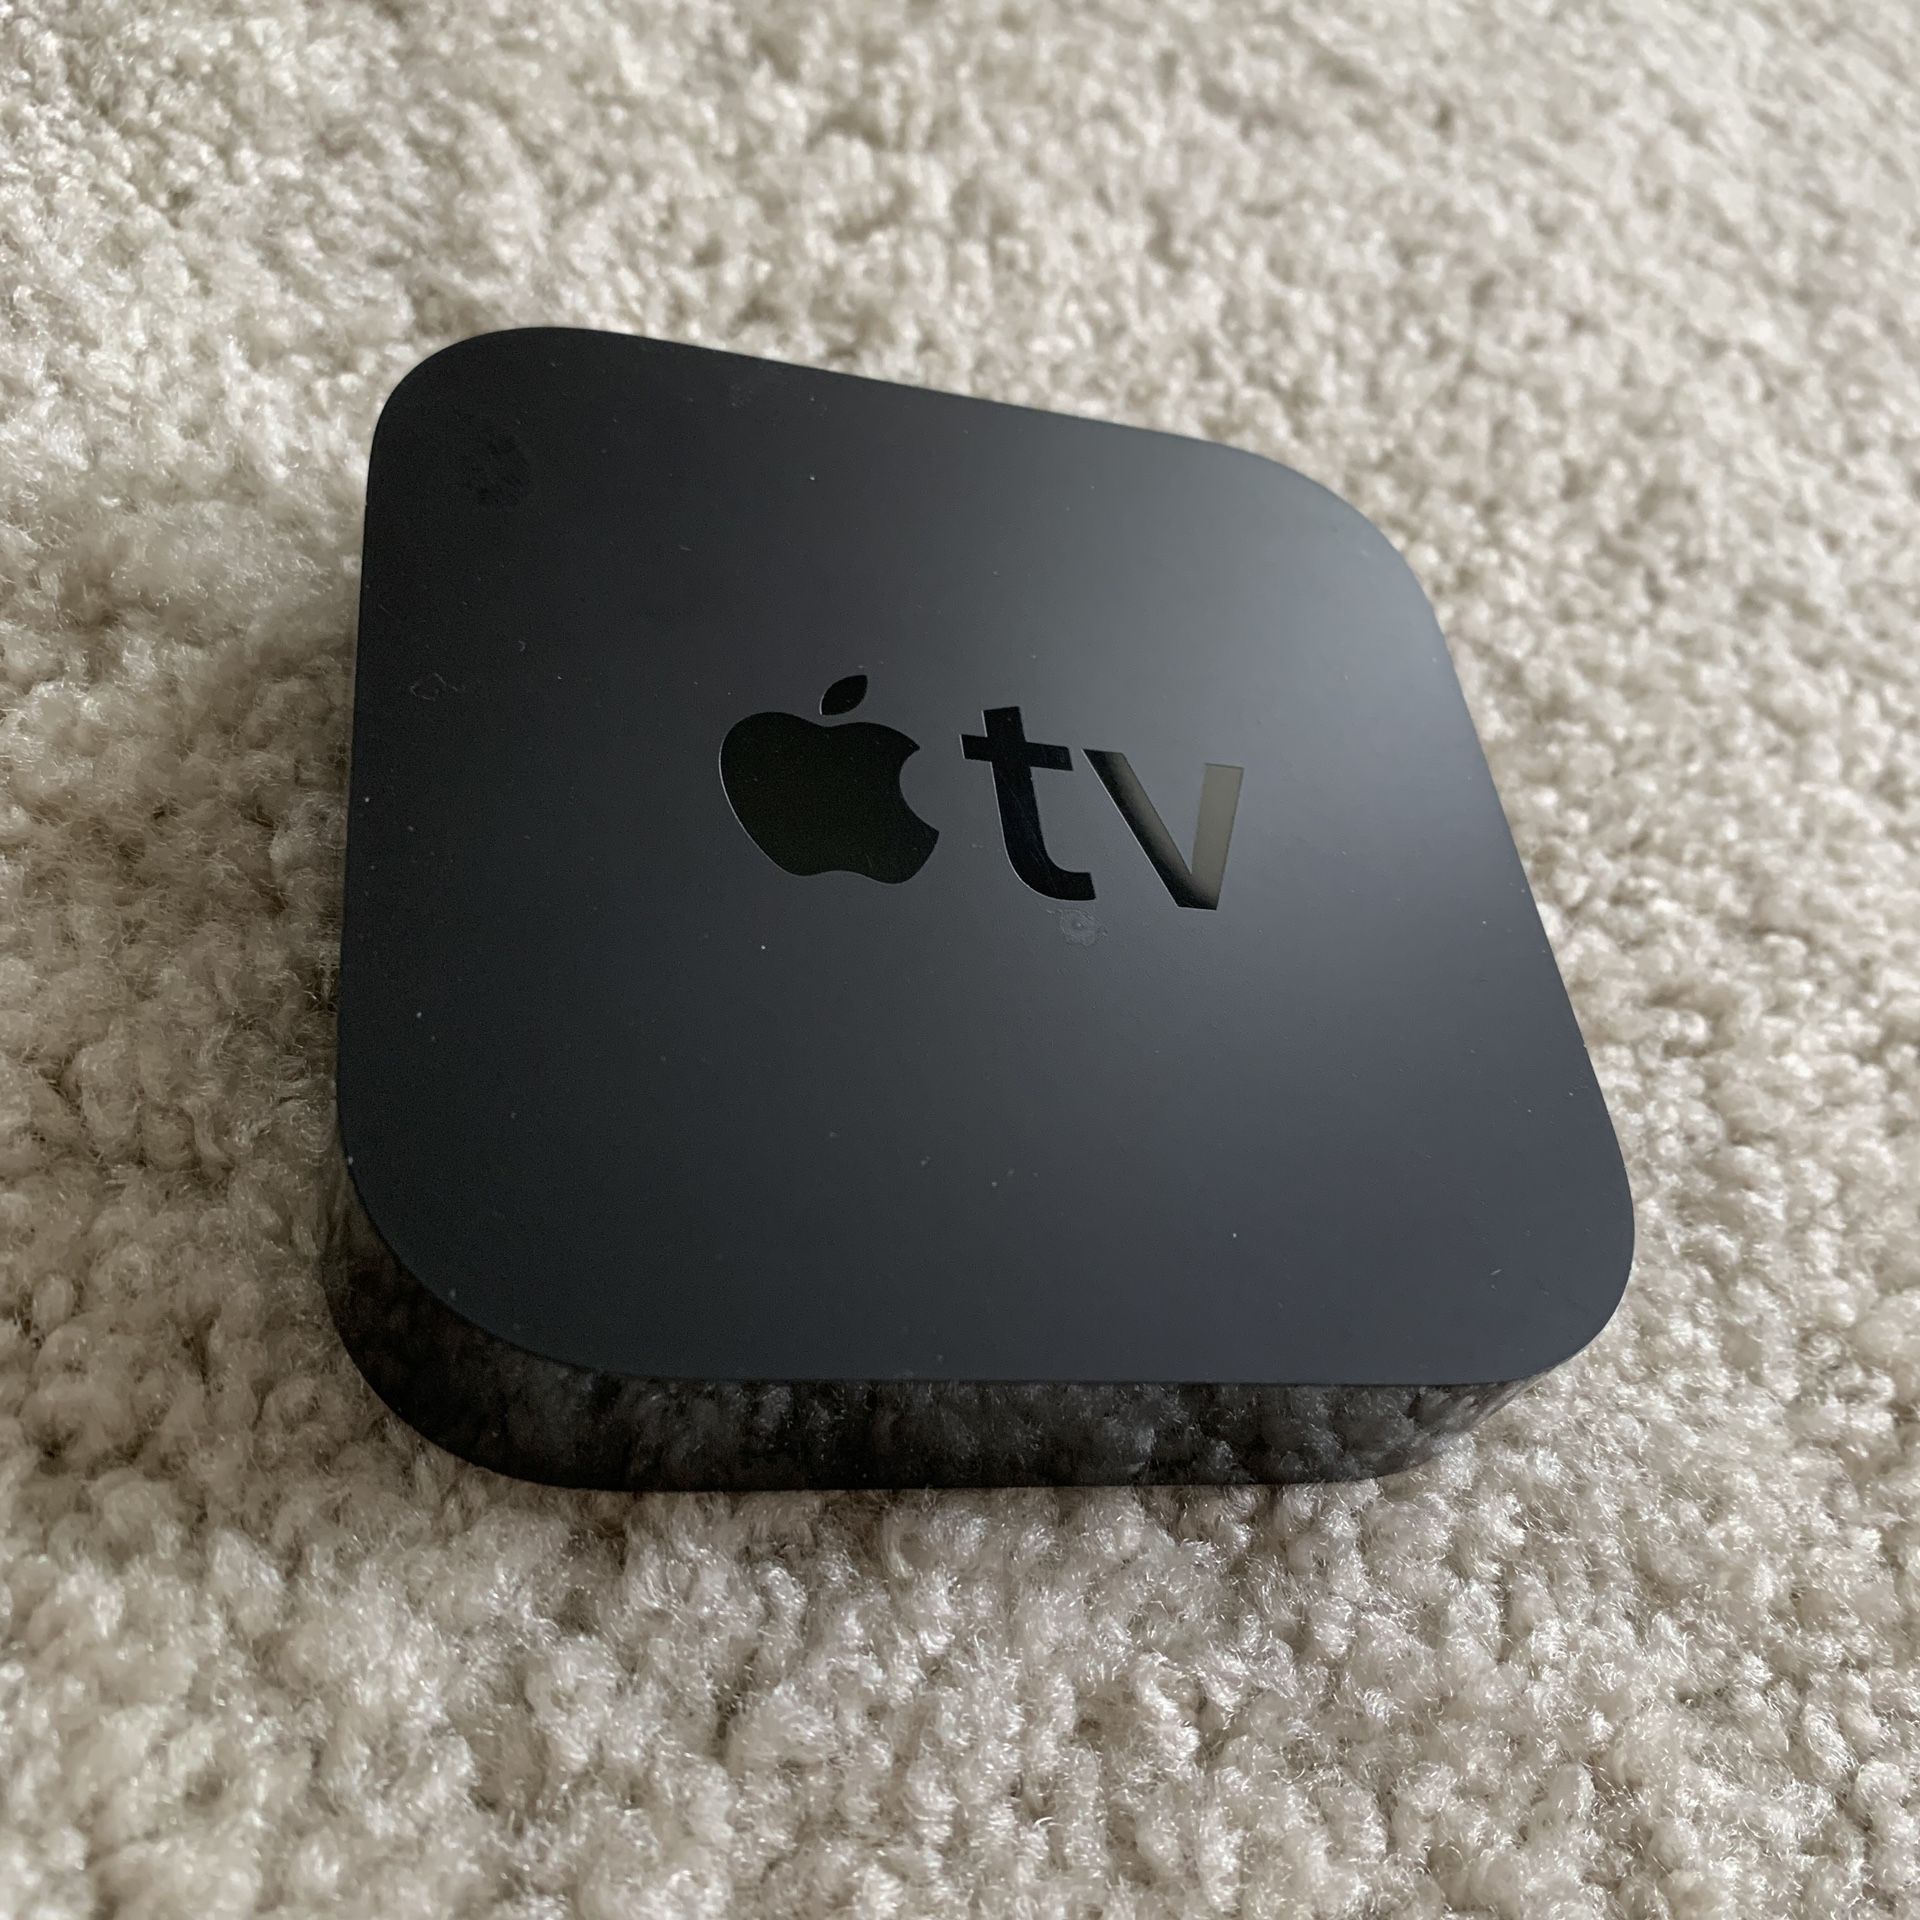 Apple TV with remote (3rd Gen)